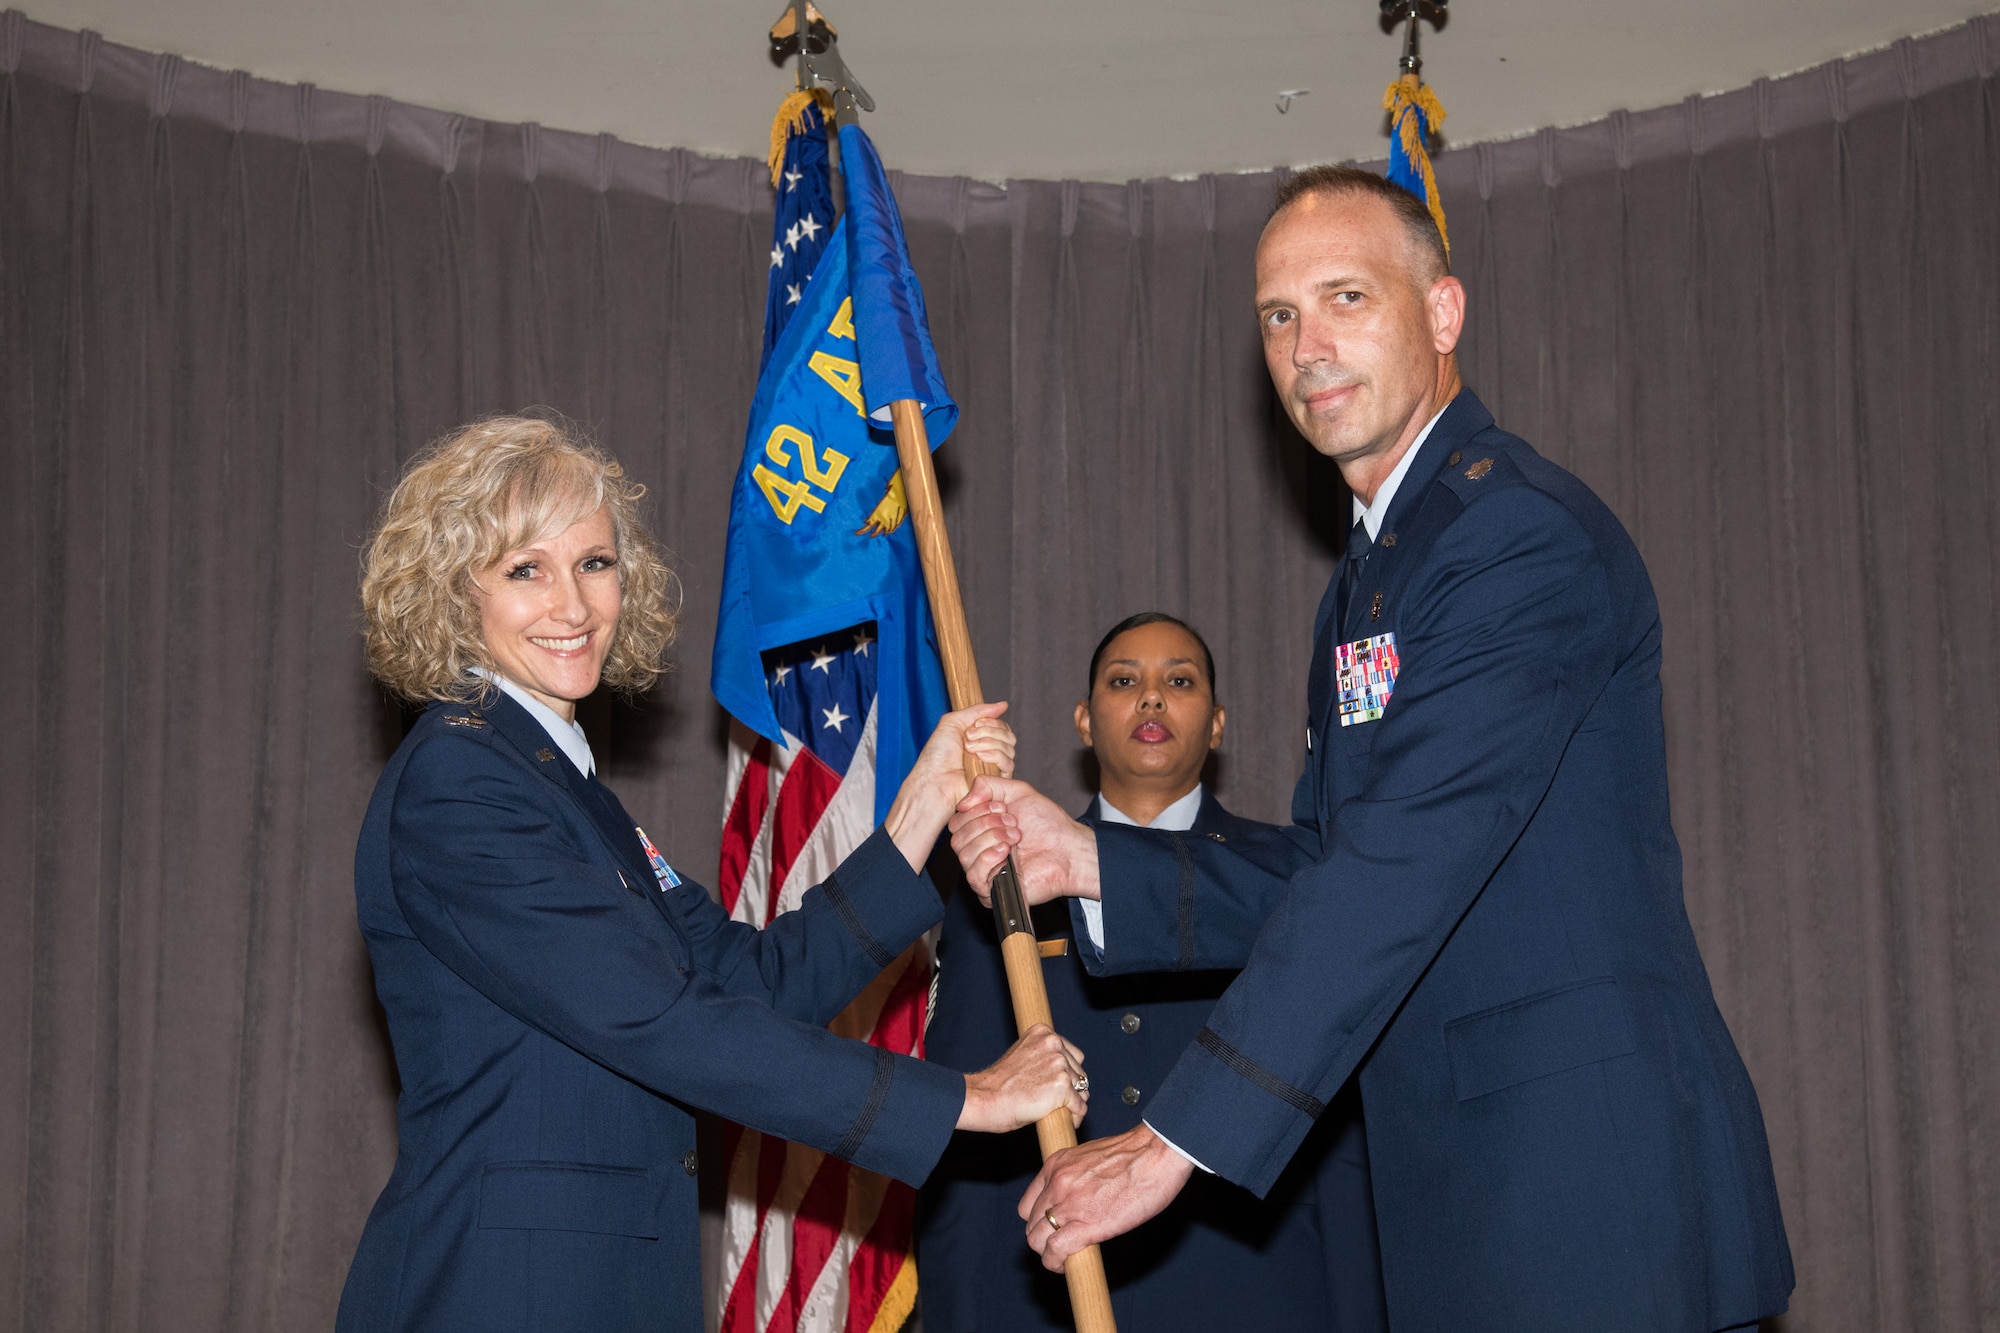 Colonel Jeanette Frantal, 42nd Medical Group commander, hands the unit flag for the 42nd Operational Medical Readiness Squadron to Lt. Col. Scott Corey, OMRS commander, during a medical group squadrons’ re-designation ceremony Aug. 5, 2019, Maxwell Air Force Base, Alabama. The 42nd Aerospace Medicine Squadron was re-designated the 42nd OMRS, which will focus on active duty care, as part of Defense Department reforms to the Military Health System. (U.S. Air Force photo by William Birchfield)